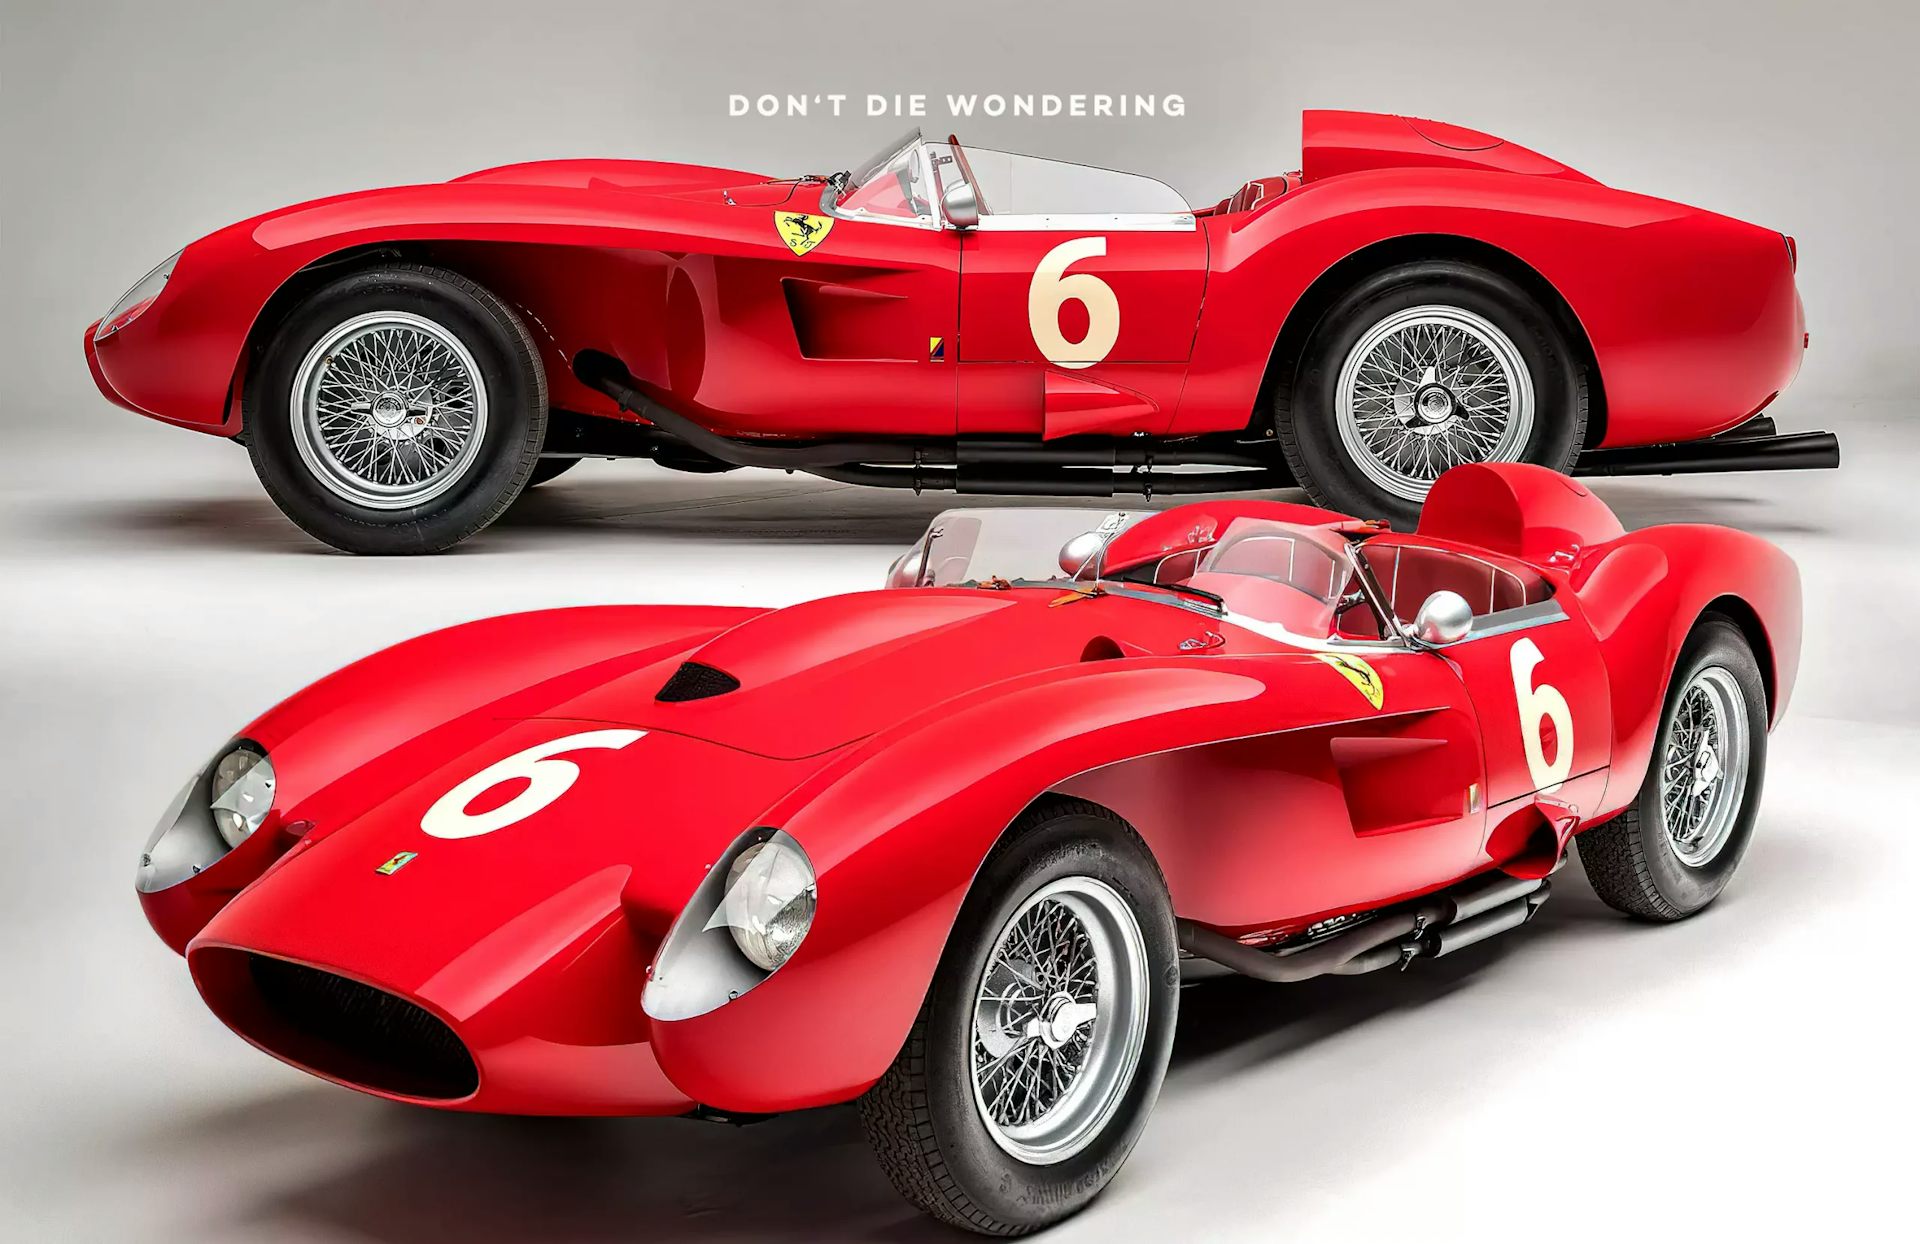 This Ultra-Rare 1957 Ferrari Race Car Could Fetch Up To $10 Million